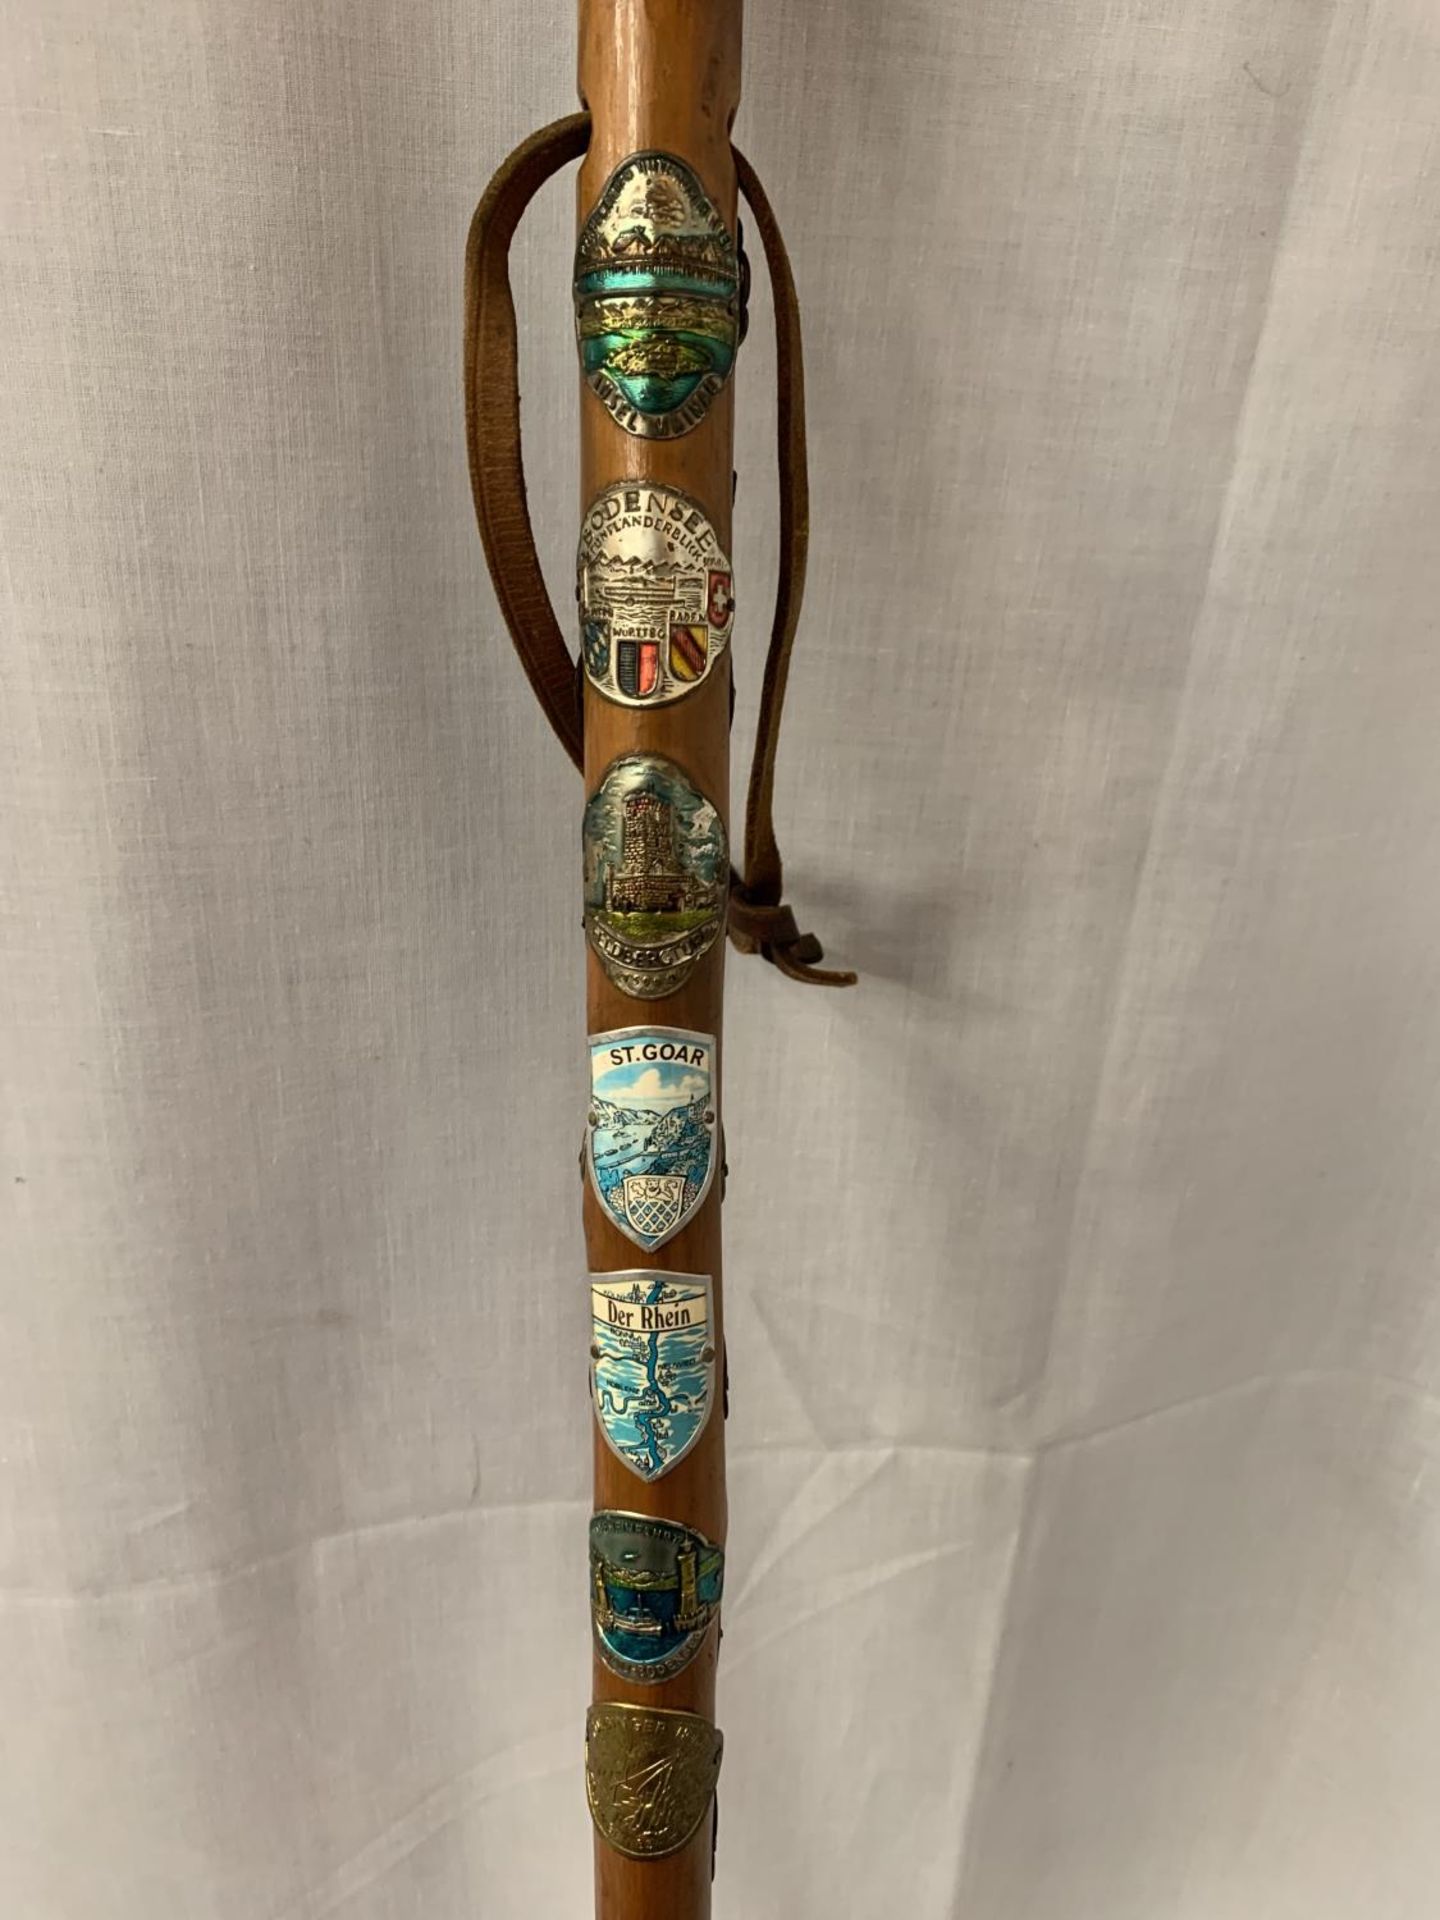 A WOODEN WALKING CANE WITH METAL TIP, LEATHER STRAP AND VARIOUS BADGES FROM THE ALPS - Image 3 of 3